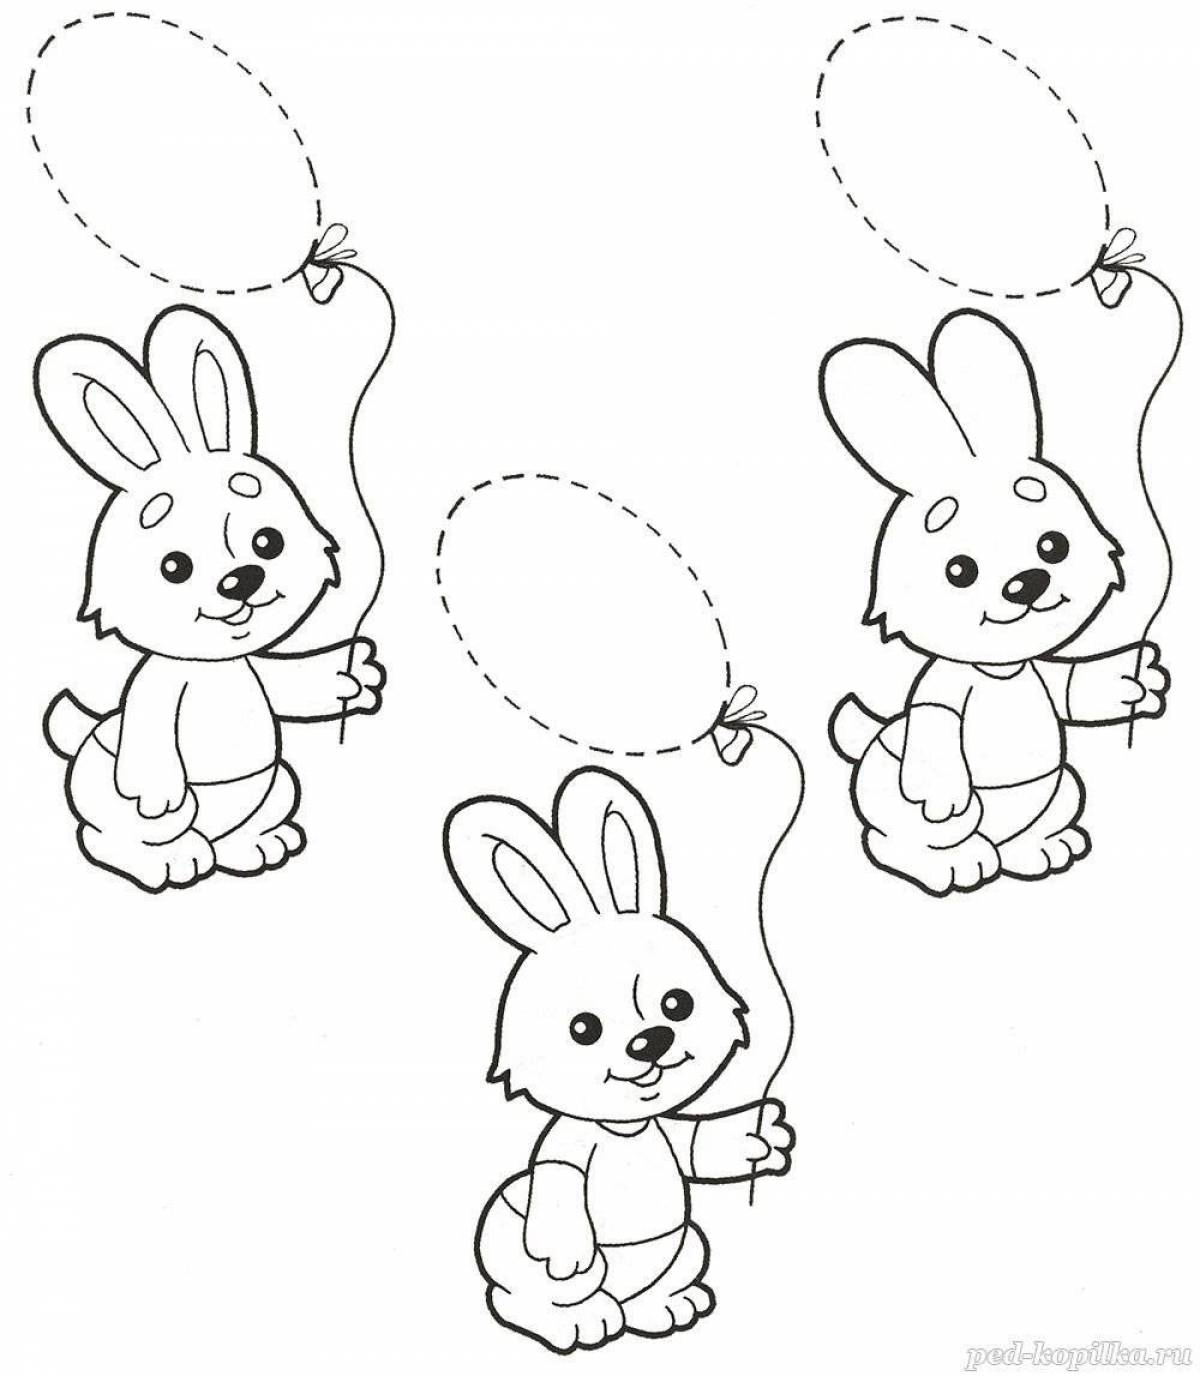 Fluffy bunny coloring book